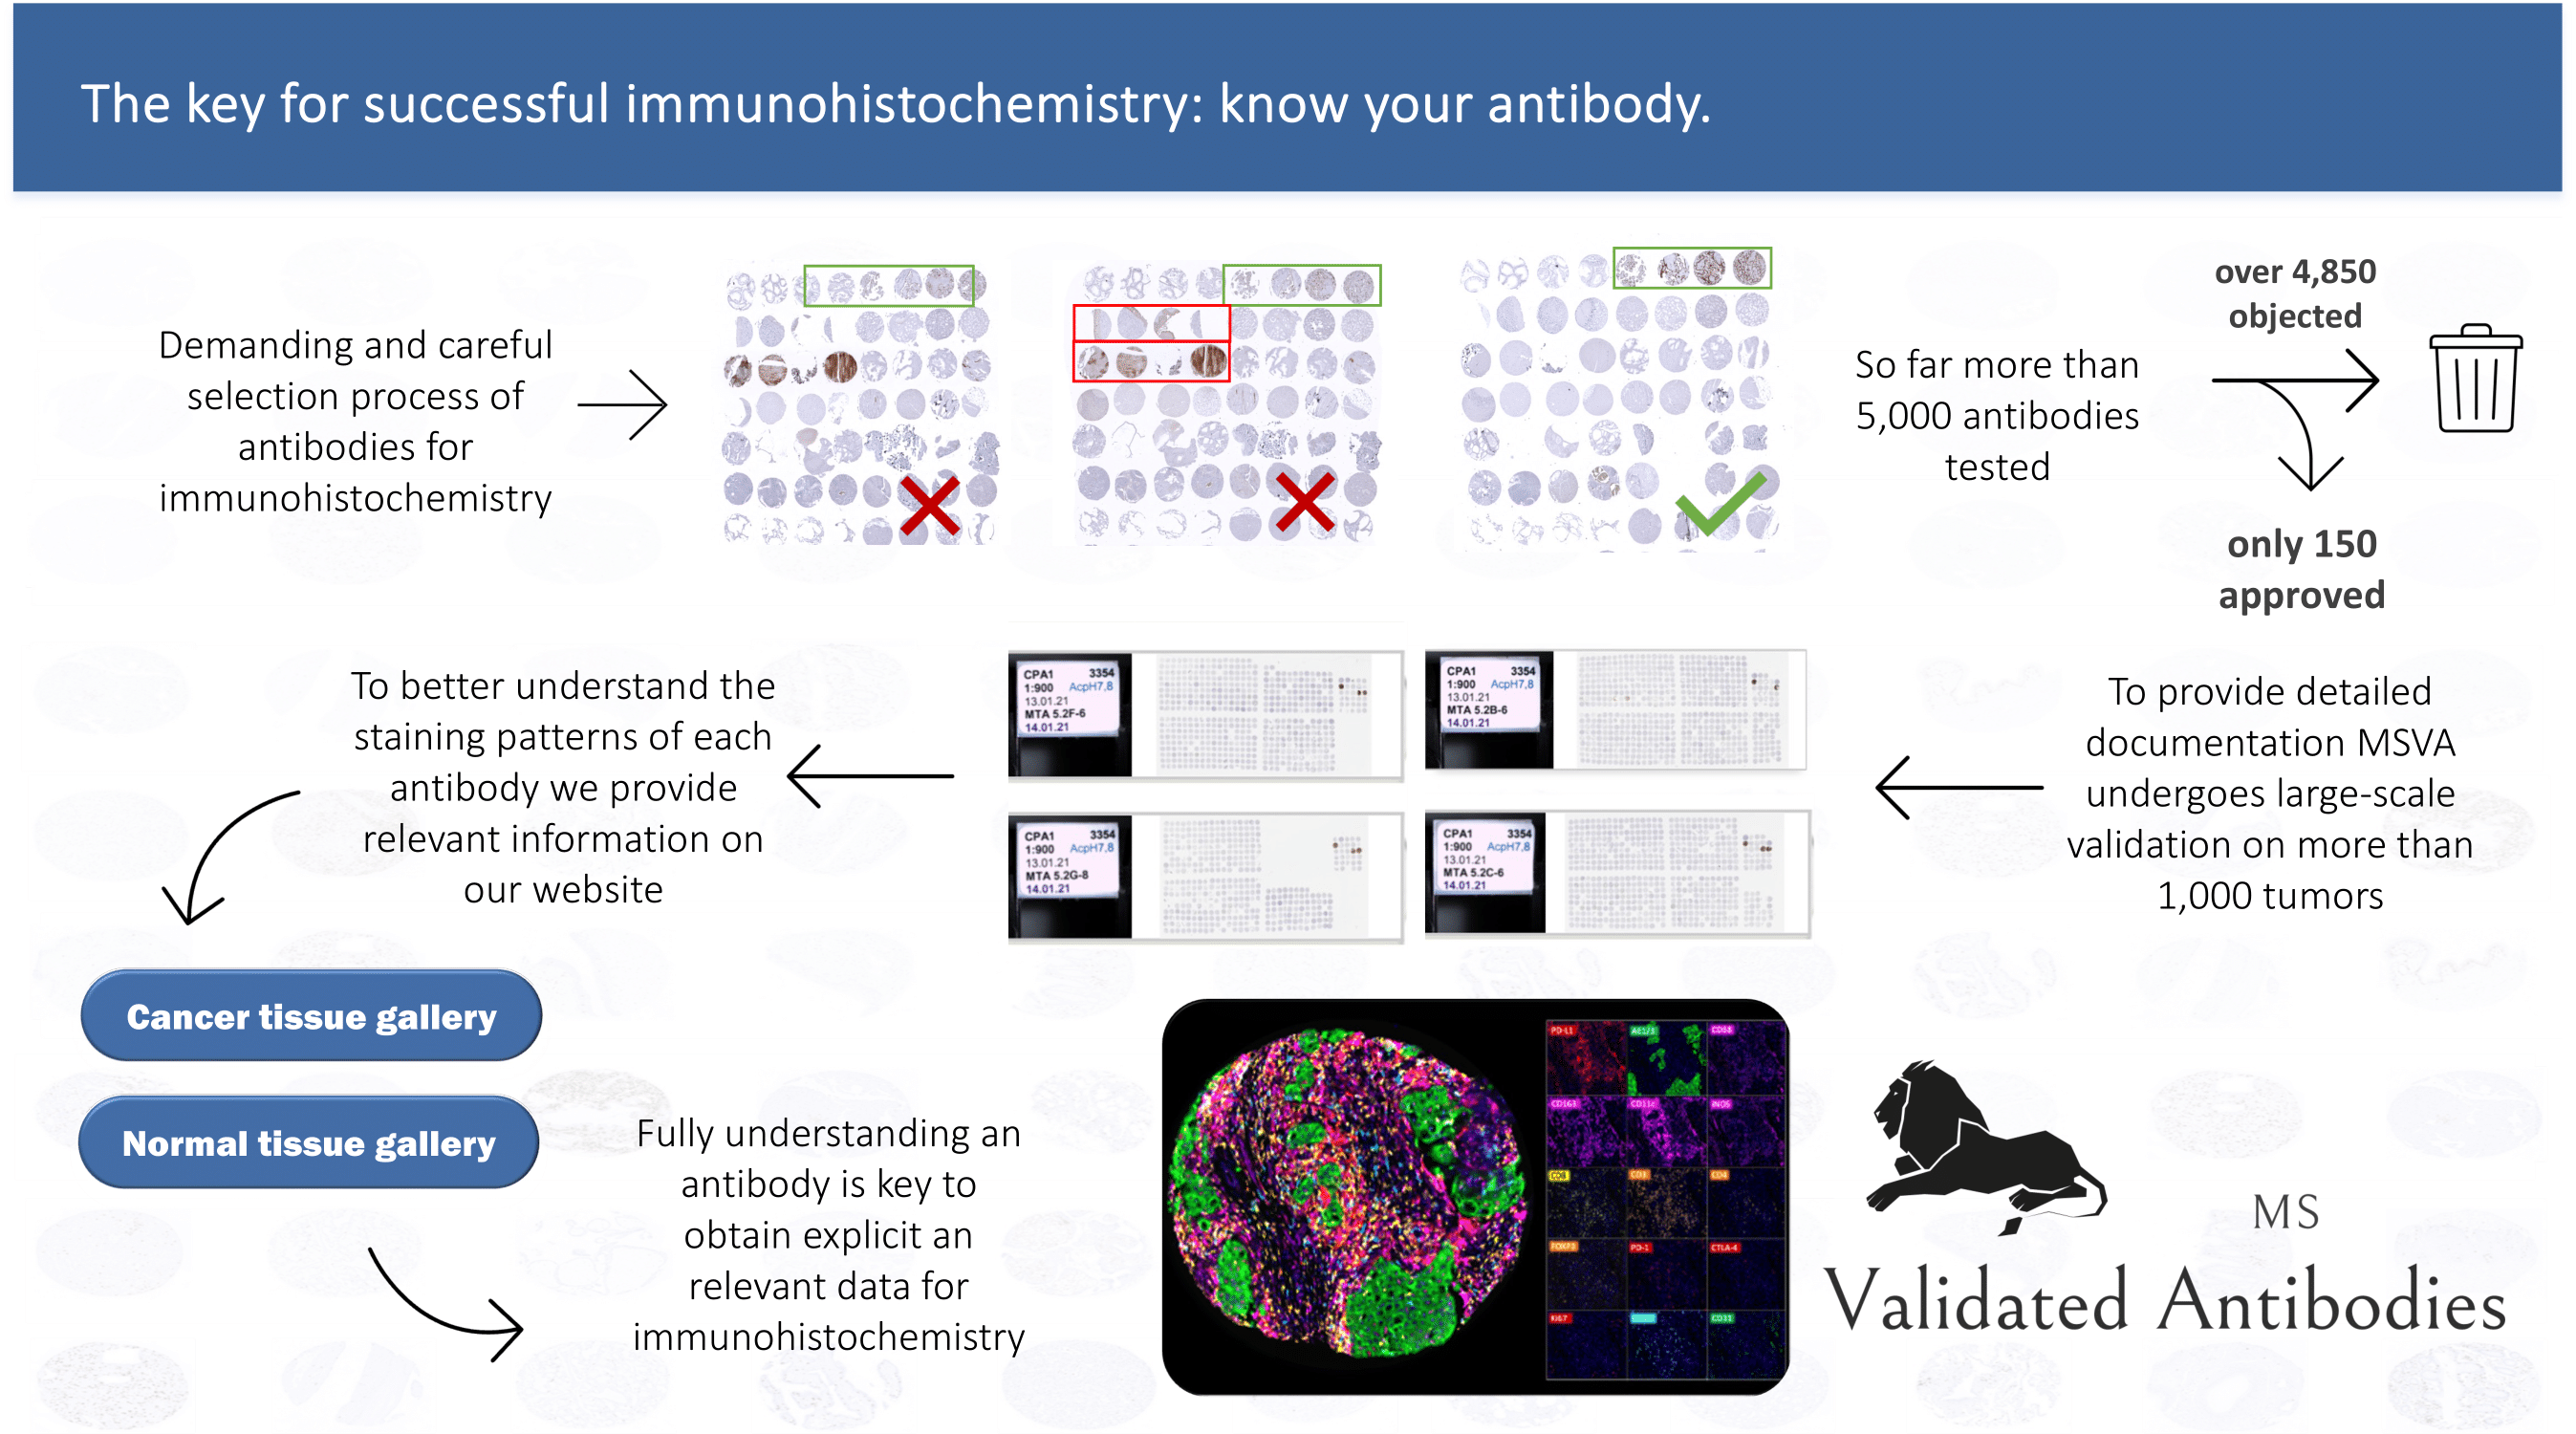 The key for successful immunohistochemistry